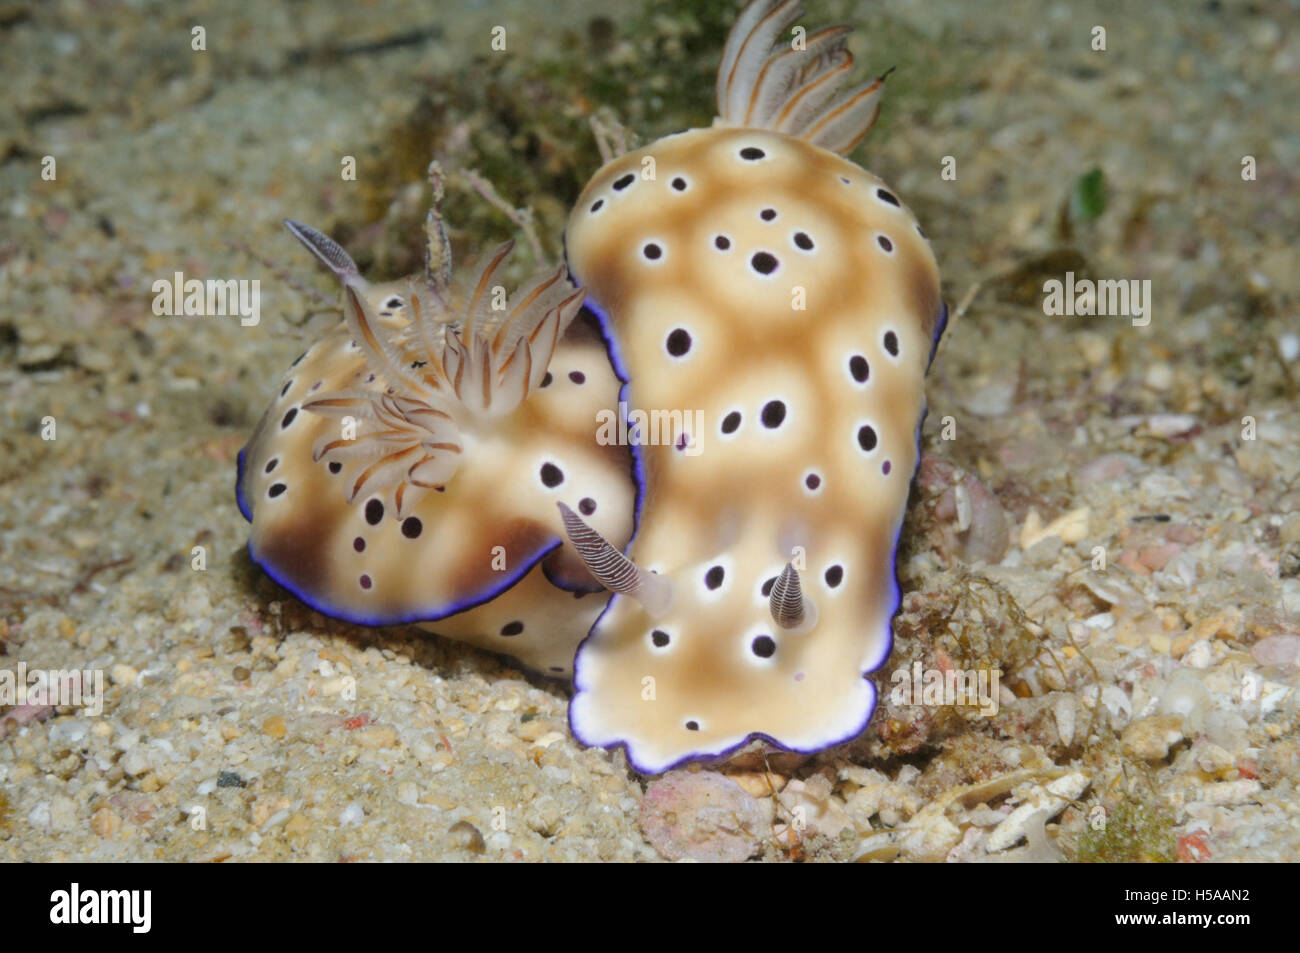 Two nudibranches (Risbecia tryoni) are crawling one over another forming a heart shape, Puerto Galera, Philippines Stock Photo